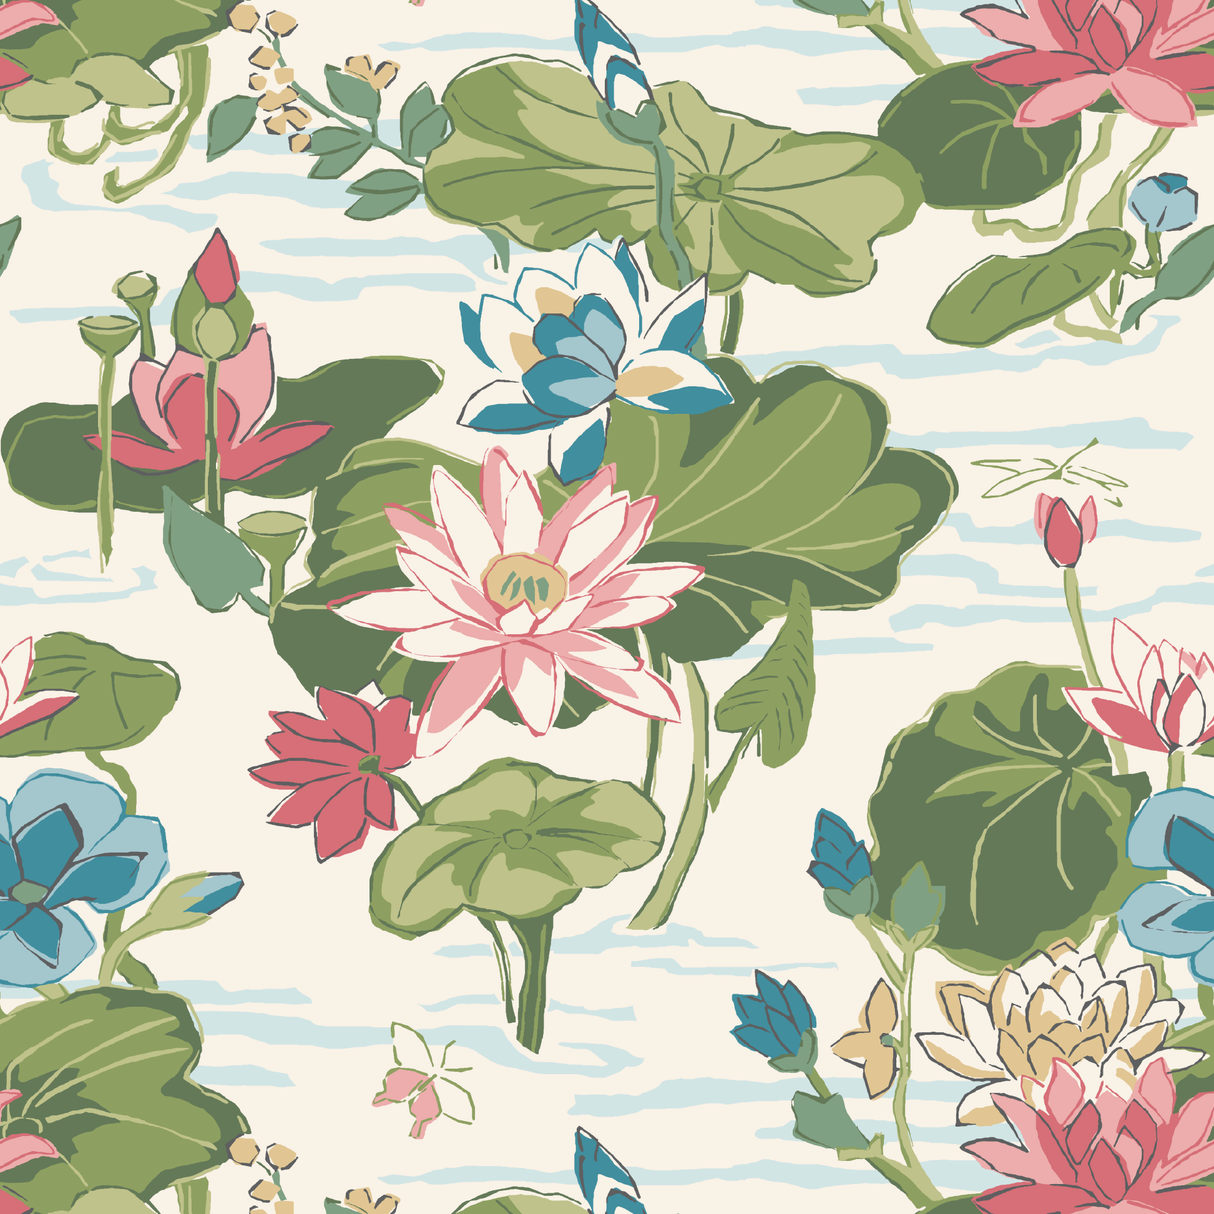 Lily Pond Lane Fabric by the Yard